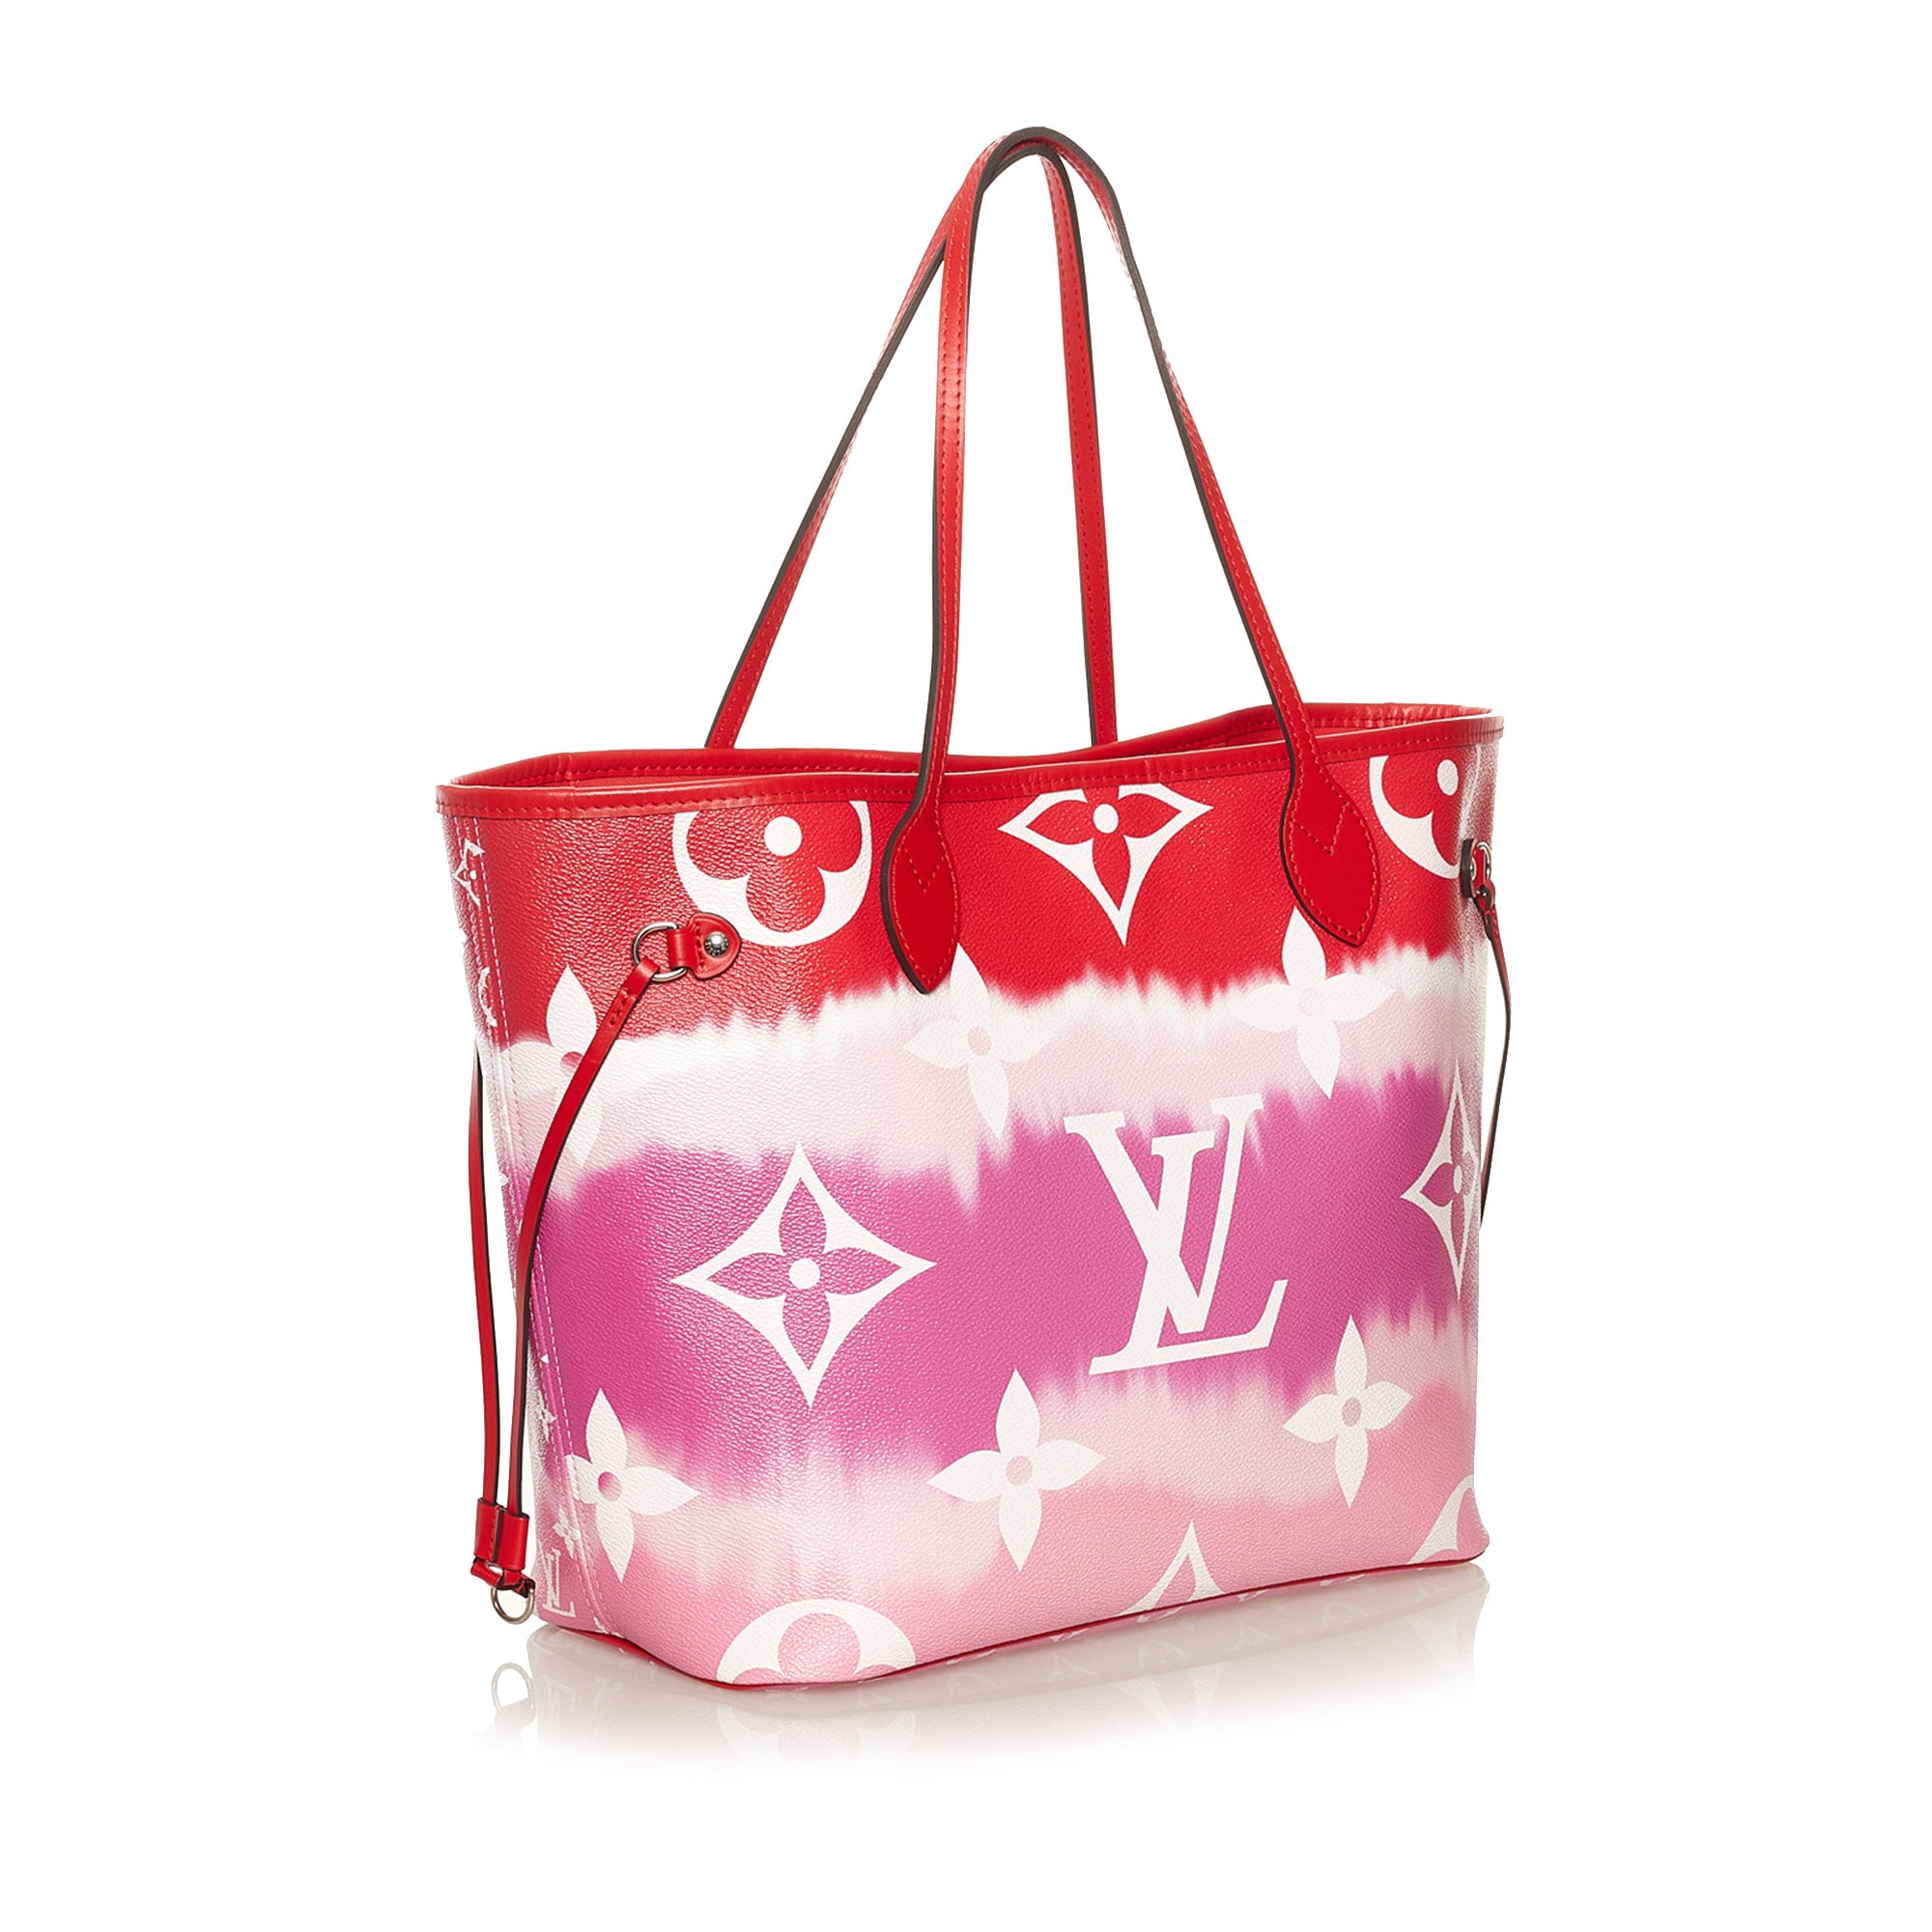 louis vuitton bags red